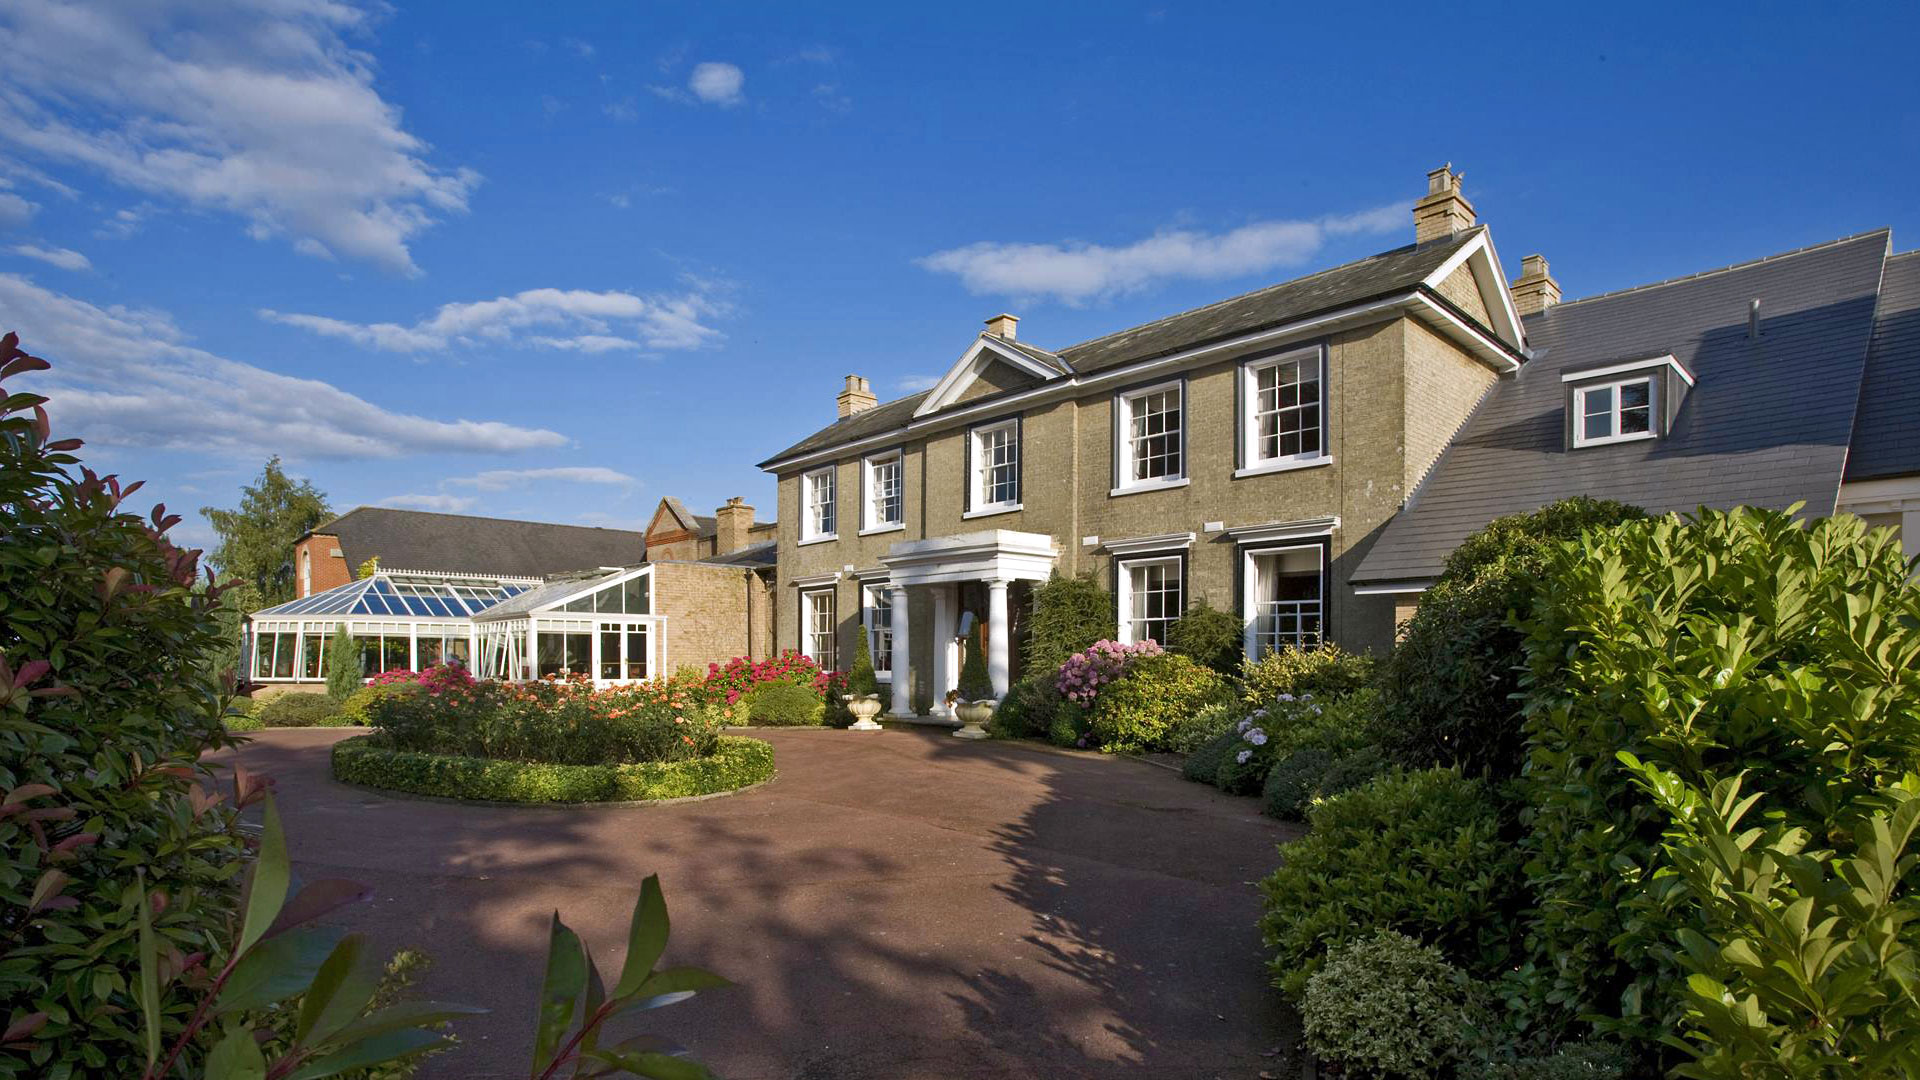 The driveway and entrance of the Hotel - Park Farm Hotel, Norwich